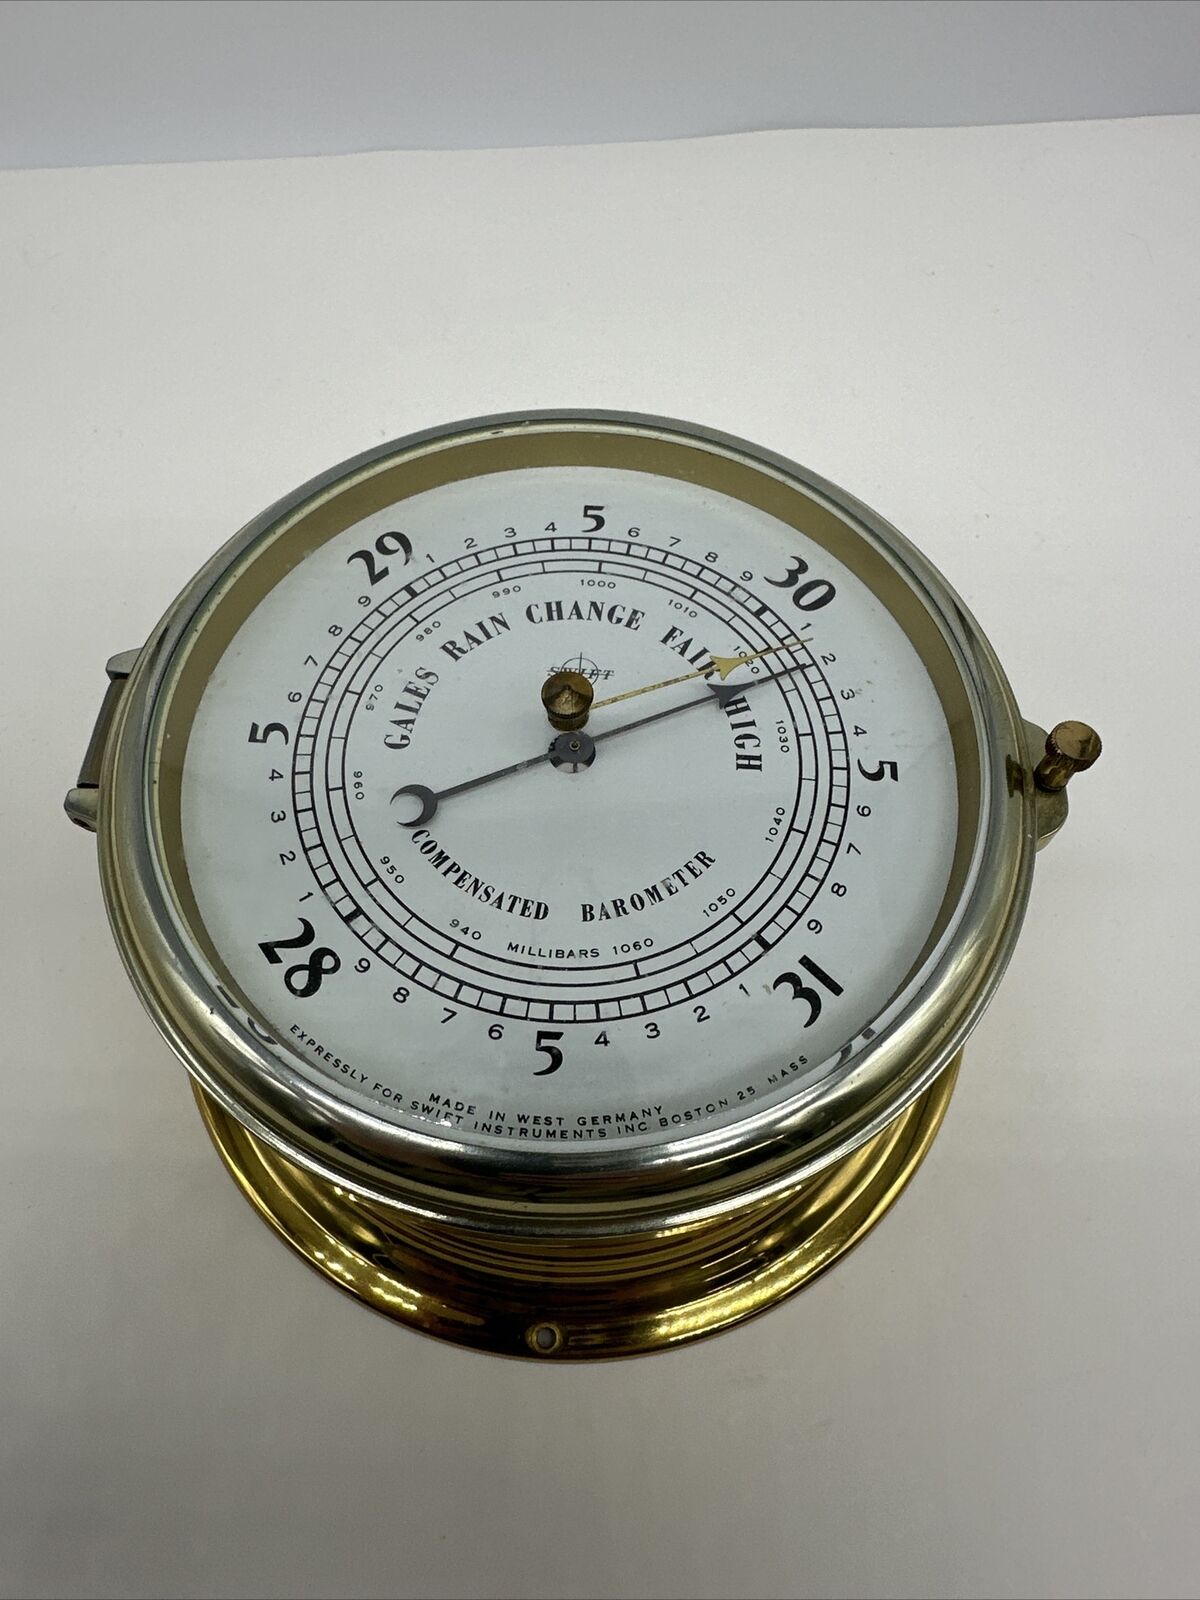 VINTAGE SWIFT INSTRUMENTS BRASS SHIP YACHT COMPENSATED BAROMETER WEST GERMANY